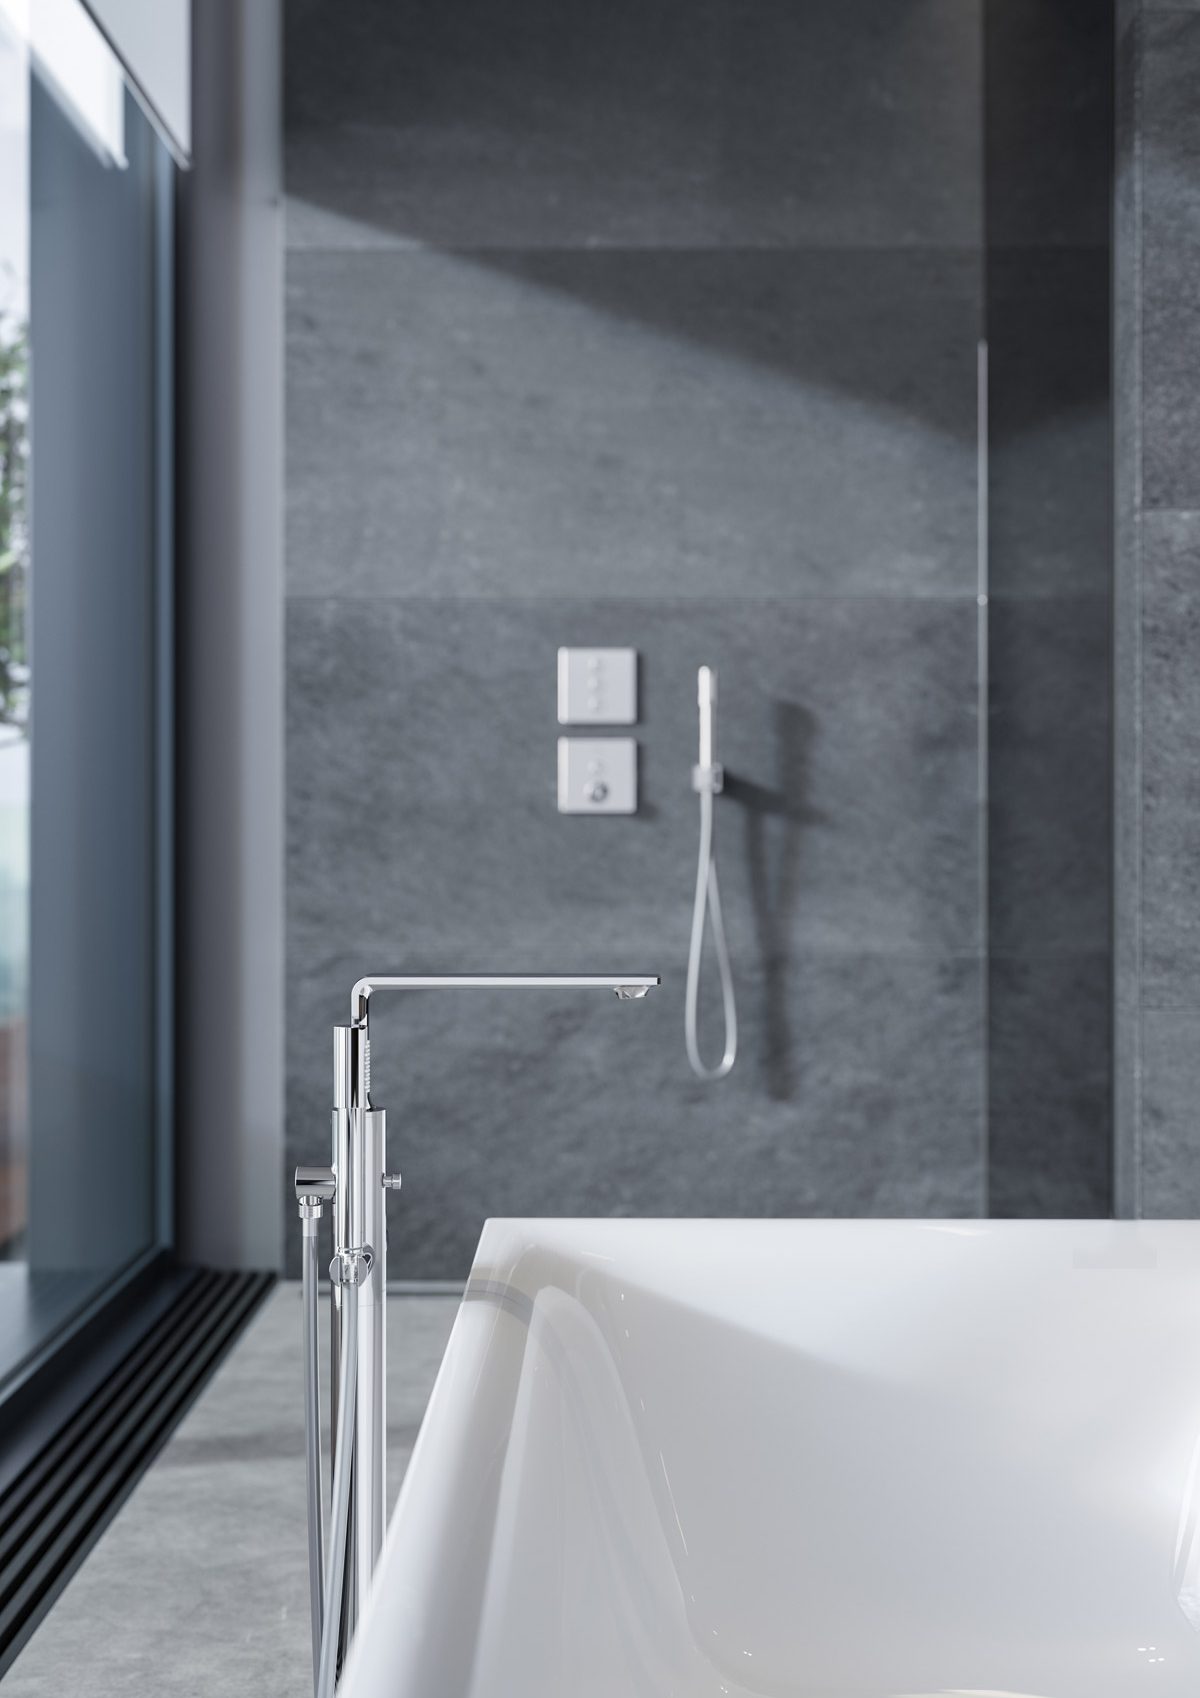 https://www.sbid.org/wp-content/uploads/2022/02/GROHE-Allure-collection-freestanding-bath-filler-in-Chrome.-Estimated-availability-end-of-2021-1200x1698.jpg